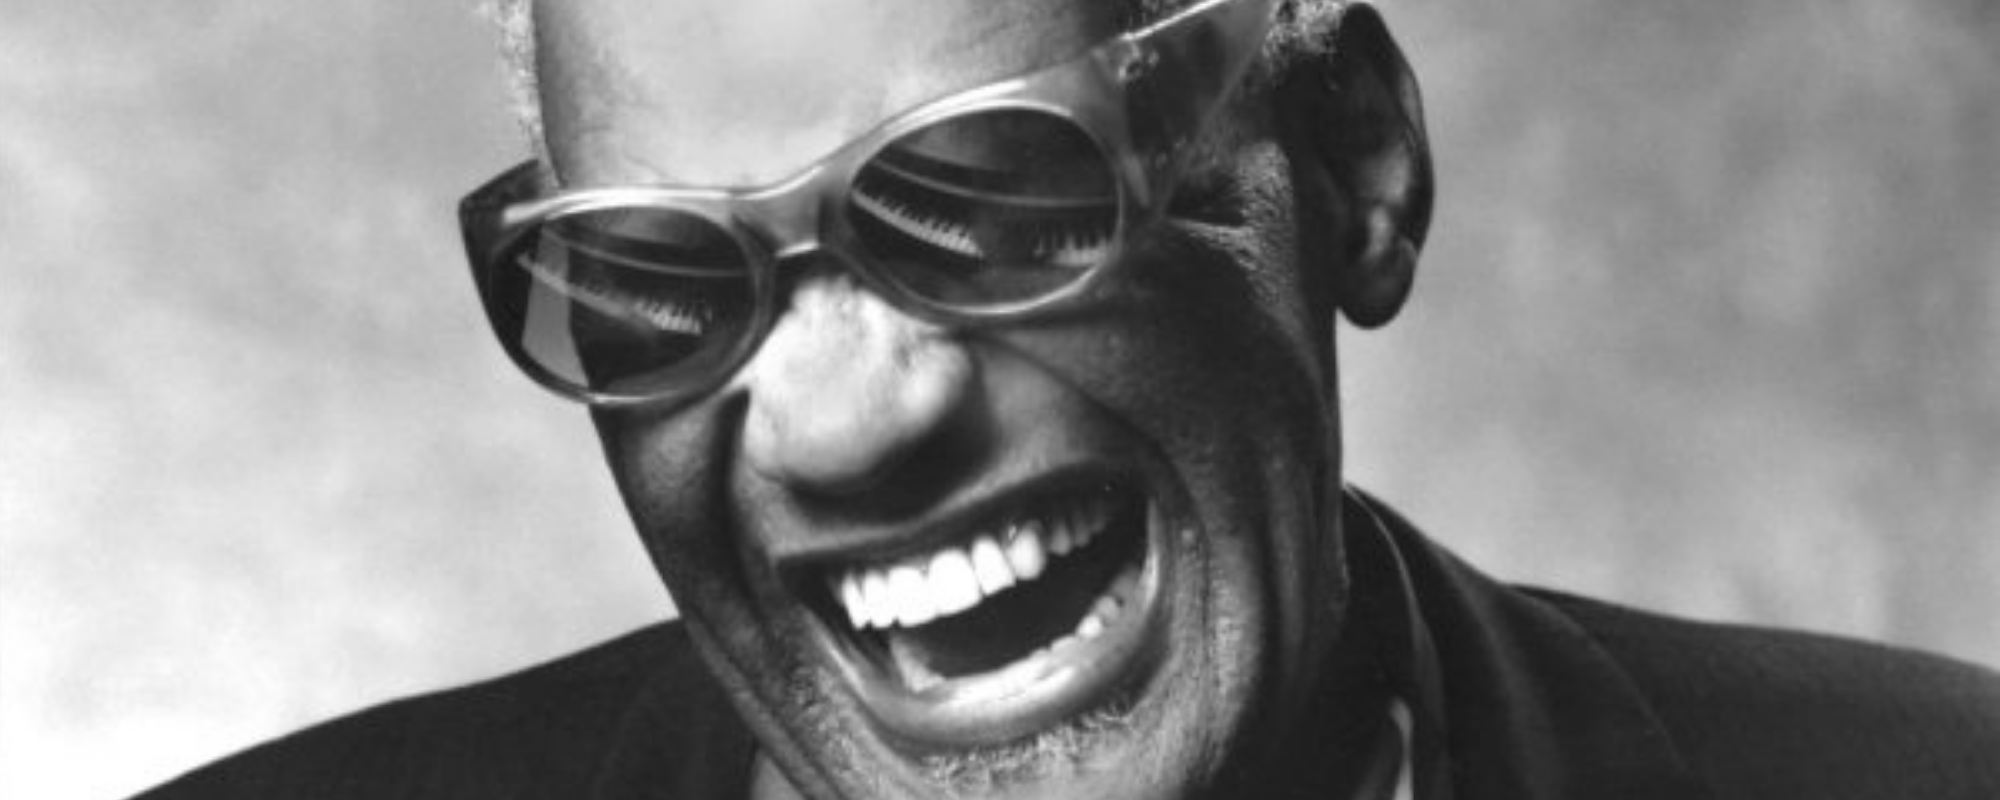 Ray Charles’ Estate Announces Two Upcoming Releases Originally from 1972